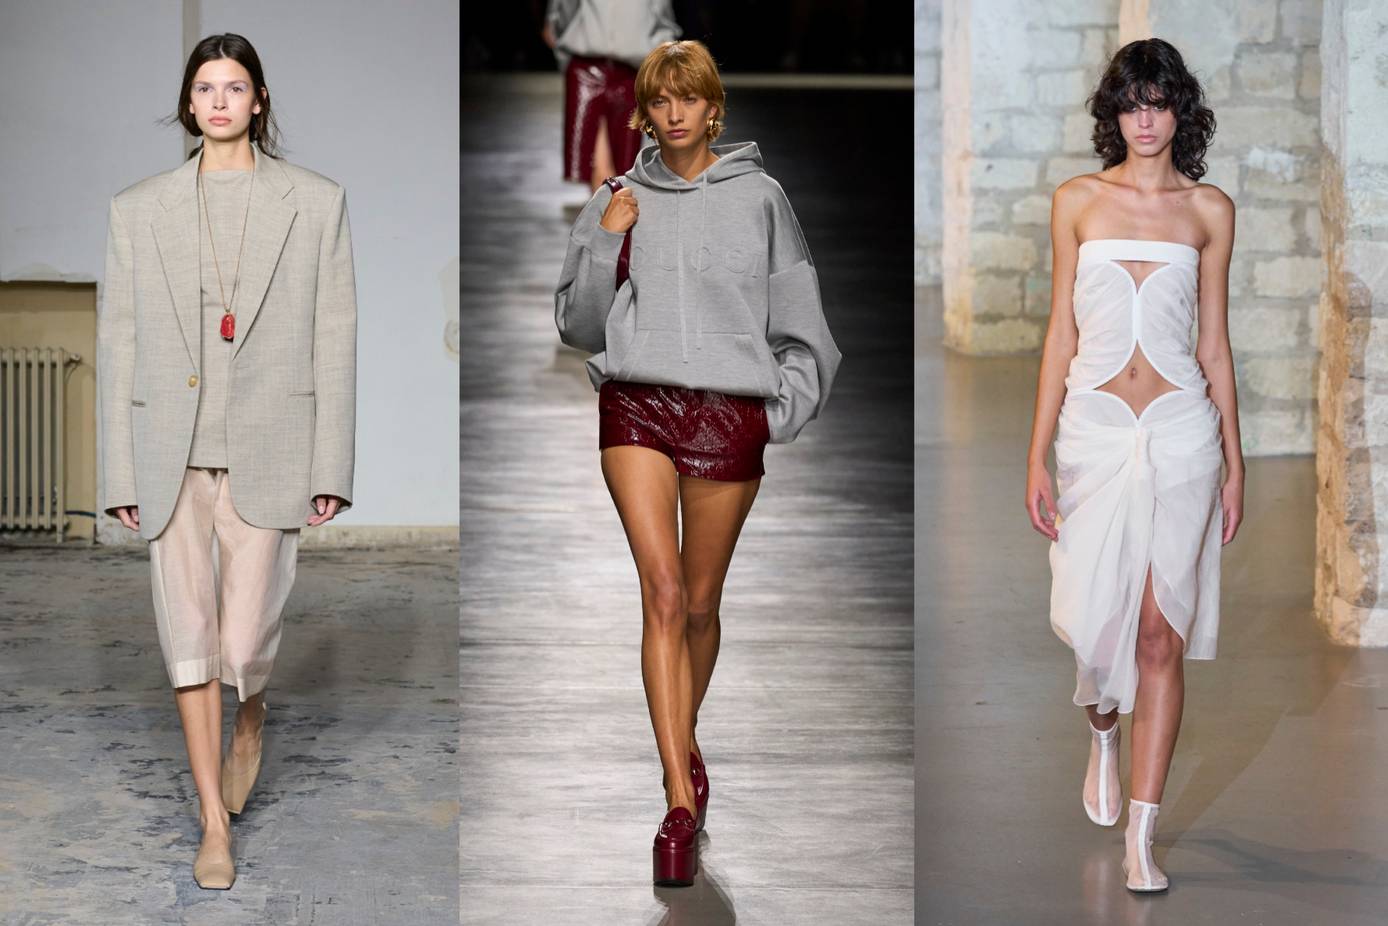 11 Spring 2020 Fashion Trends You Need to Know